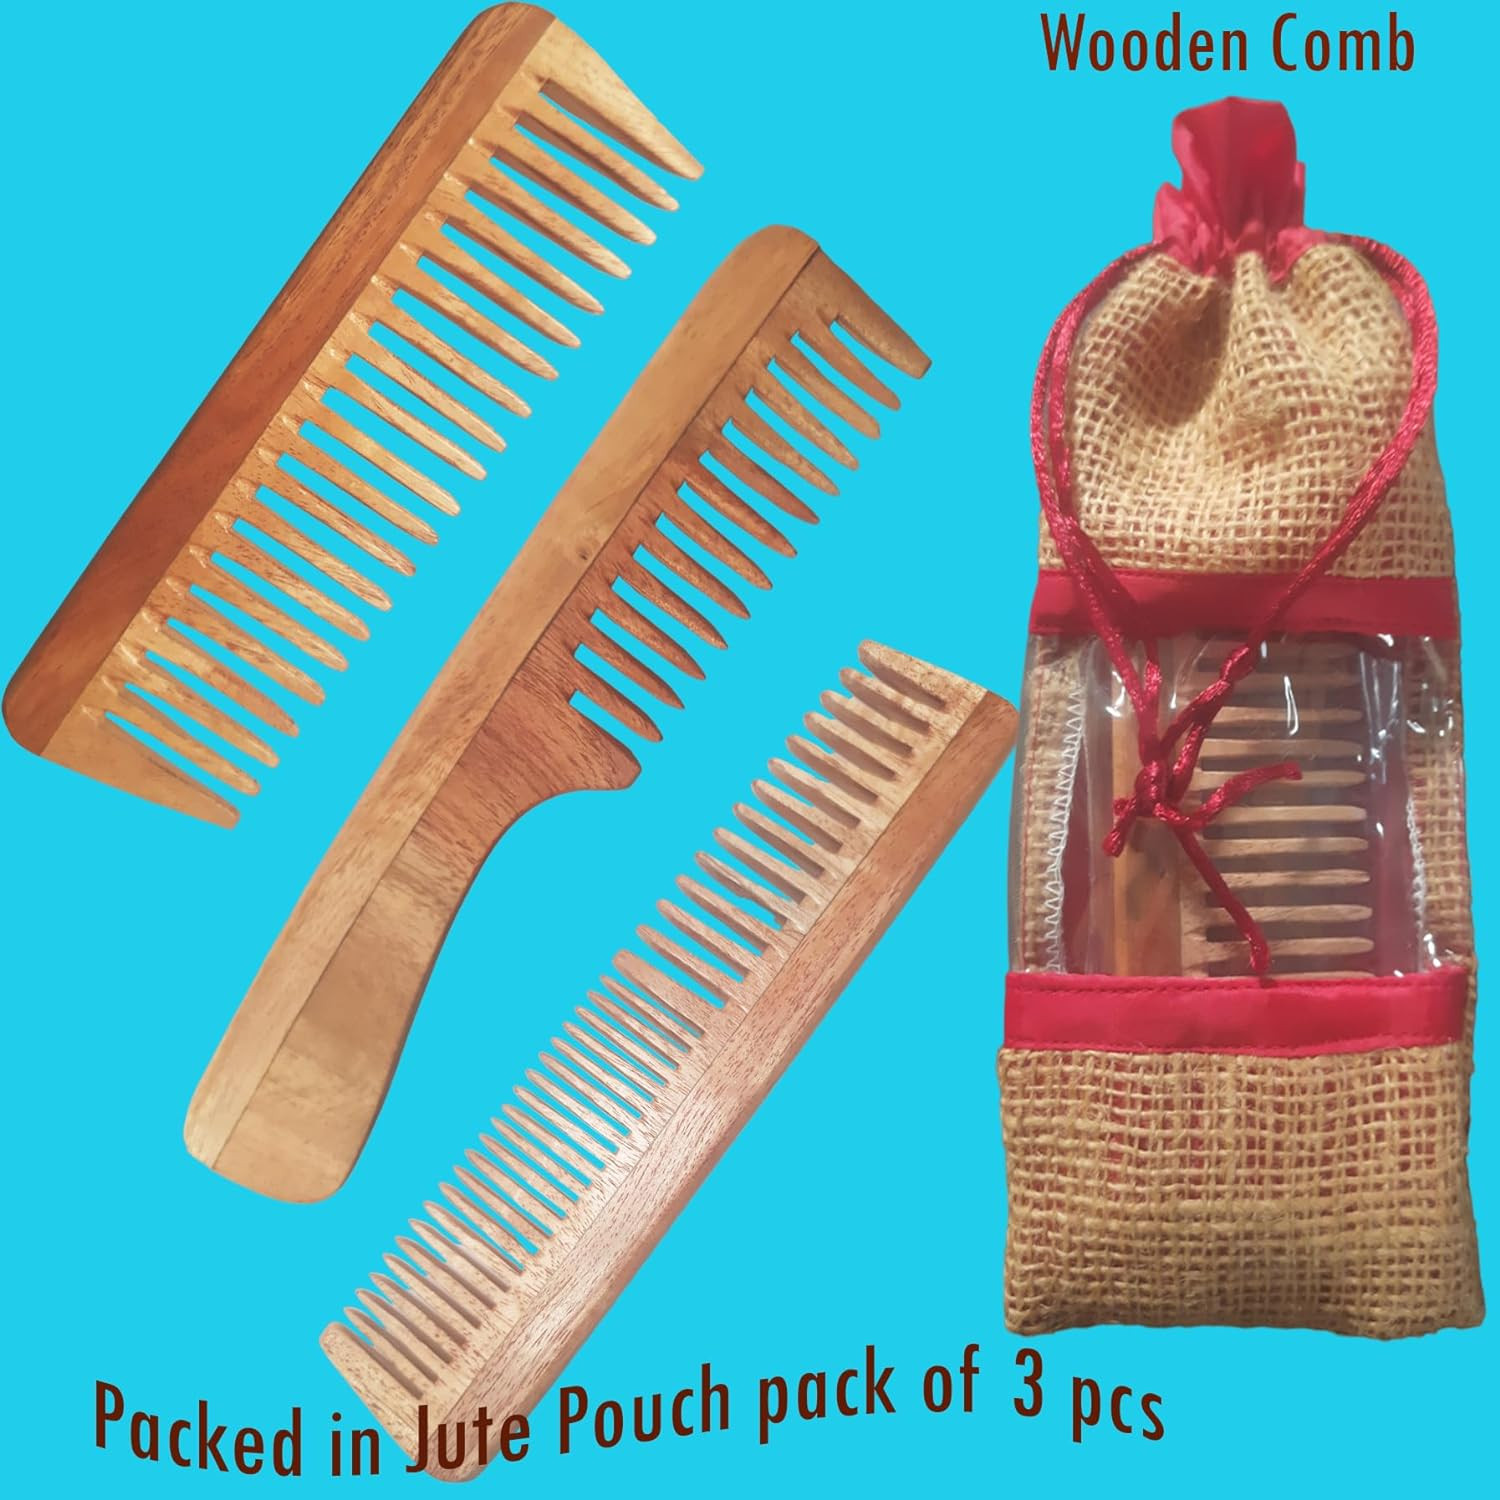 Zicniccom-Neem Wood Comb(3 pcs) For Hair Growth-Hair treatments | Hair comb set combo for Women & Men|Combs for Spa-Hair clinic | Neem Kangi | Kanghi for Hair (set of 3pcs/pieces comb),in Jute Packing